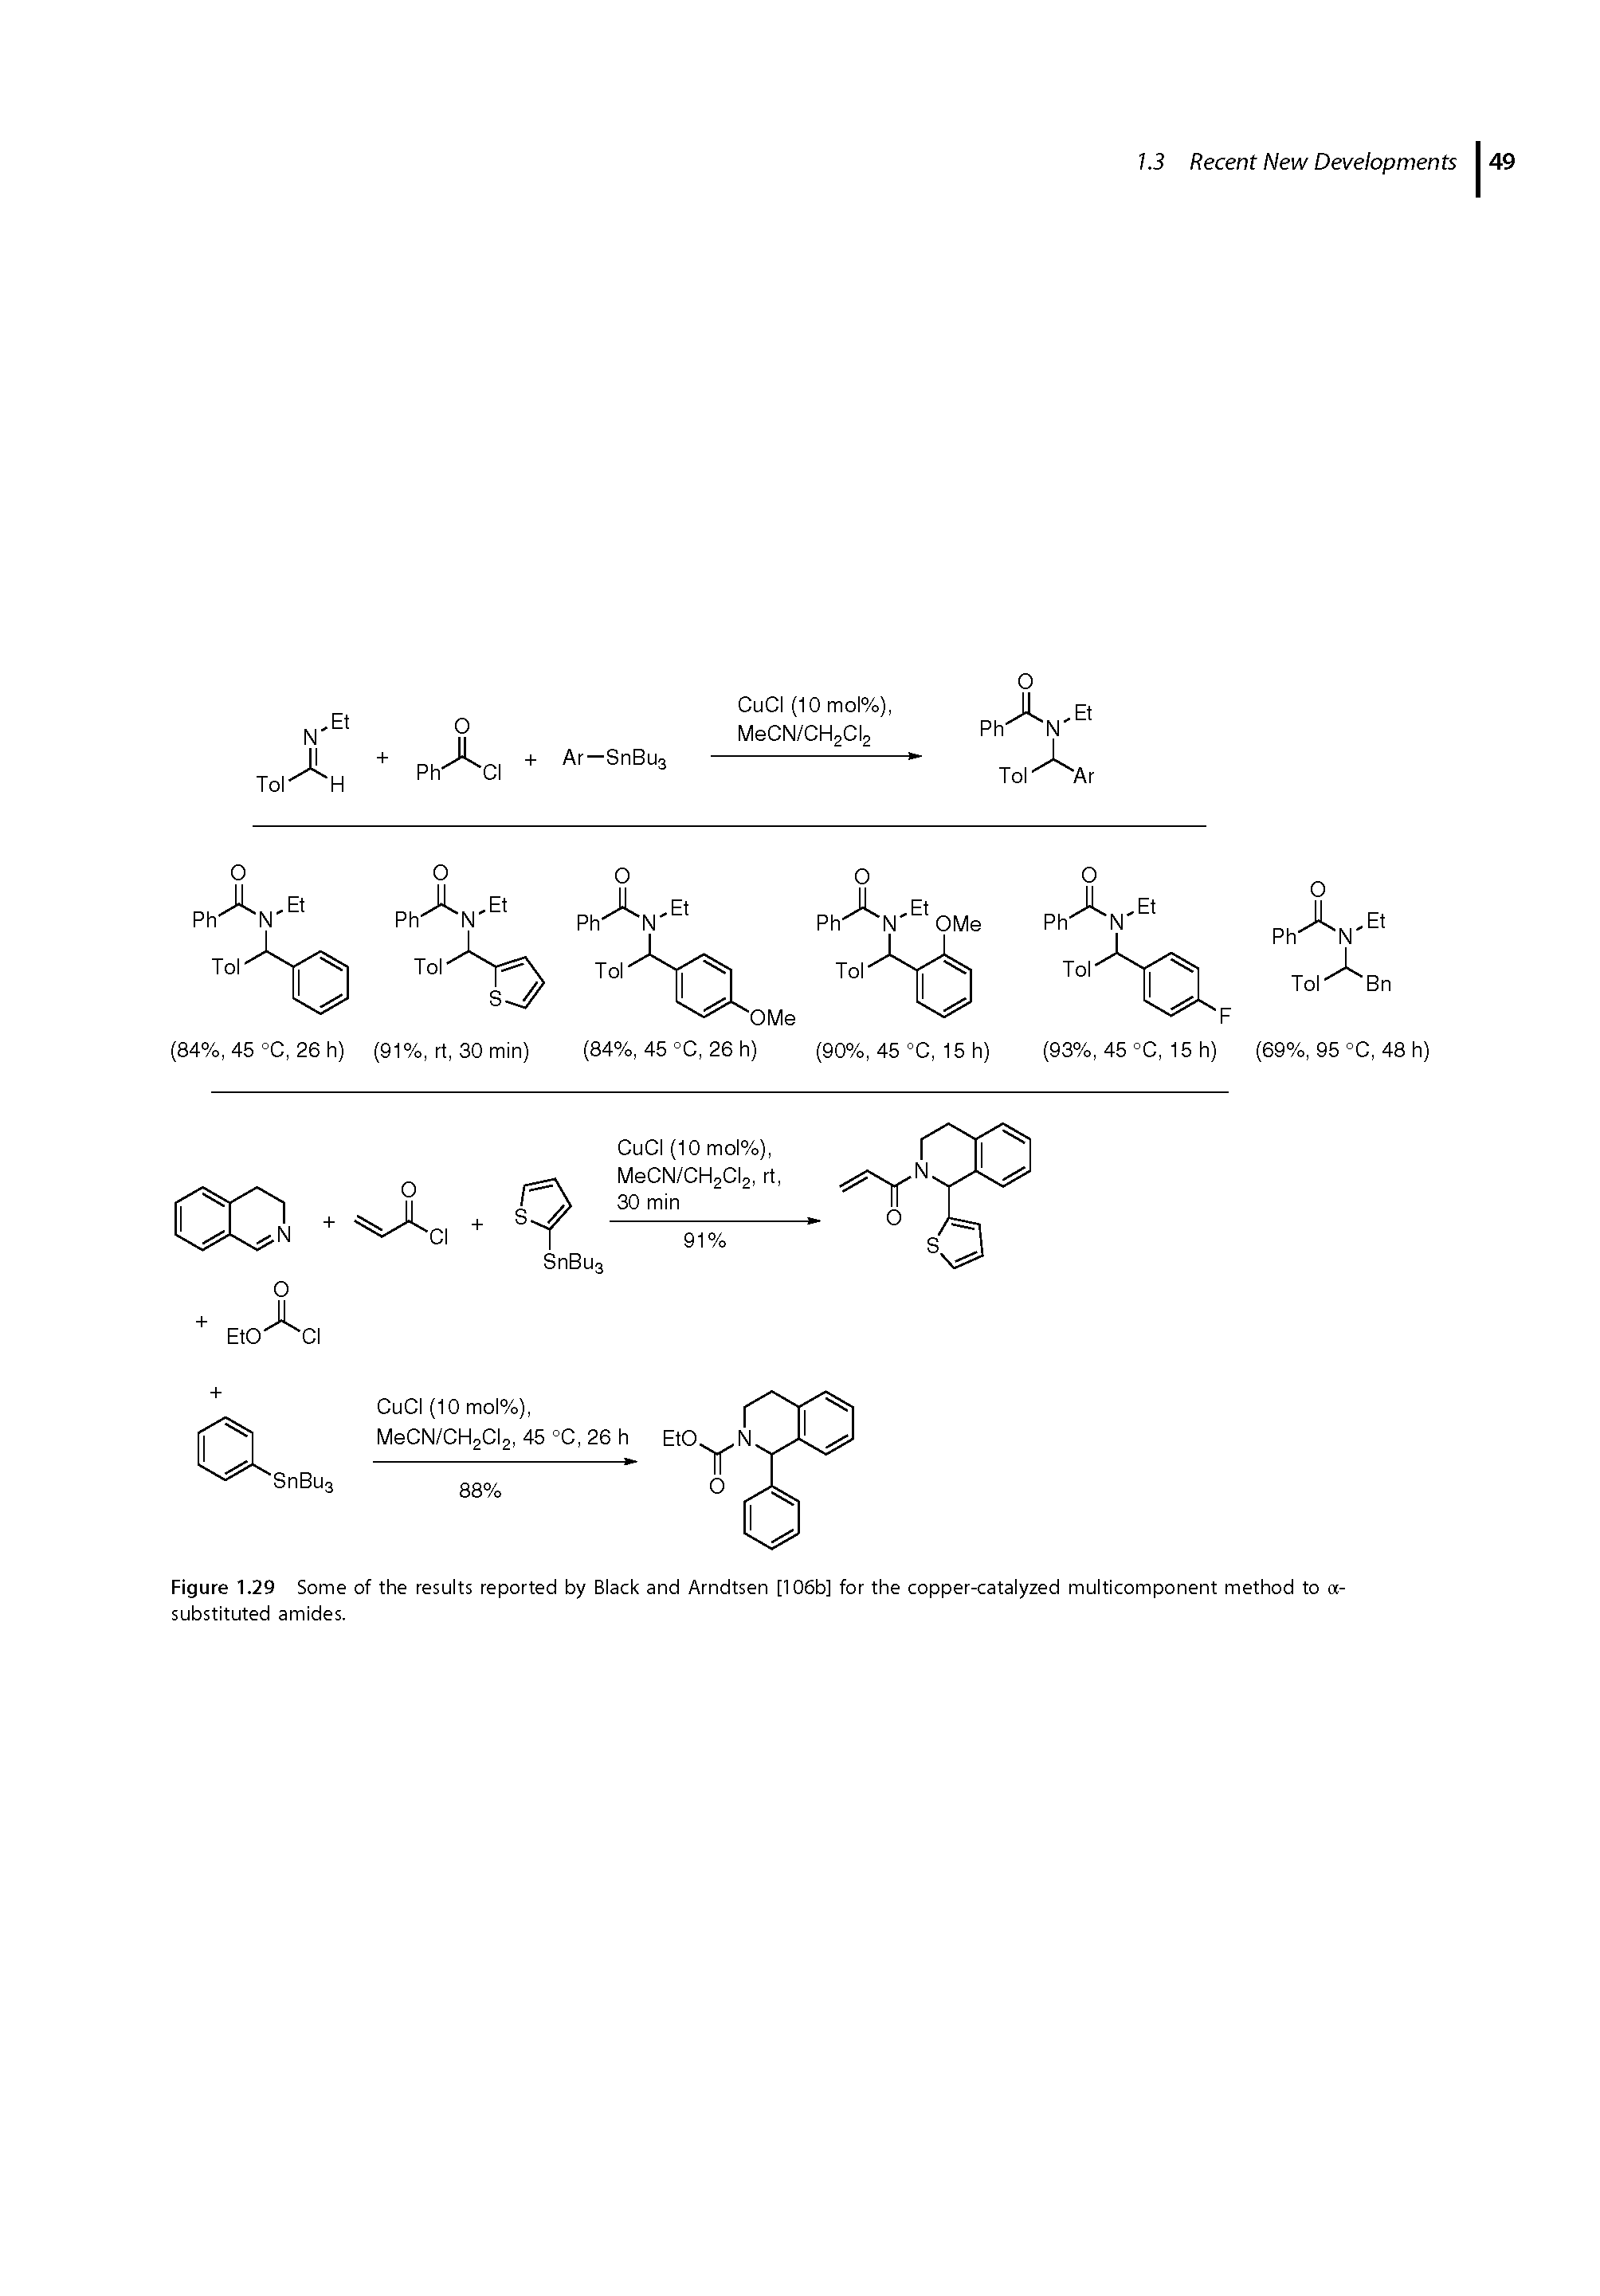 Figure 1.29 Some of the results reported by Black and Arndtsen [106b] for the copper-catalyzed multicomponent method to a-substituted amides.